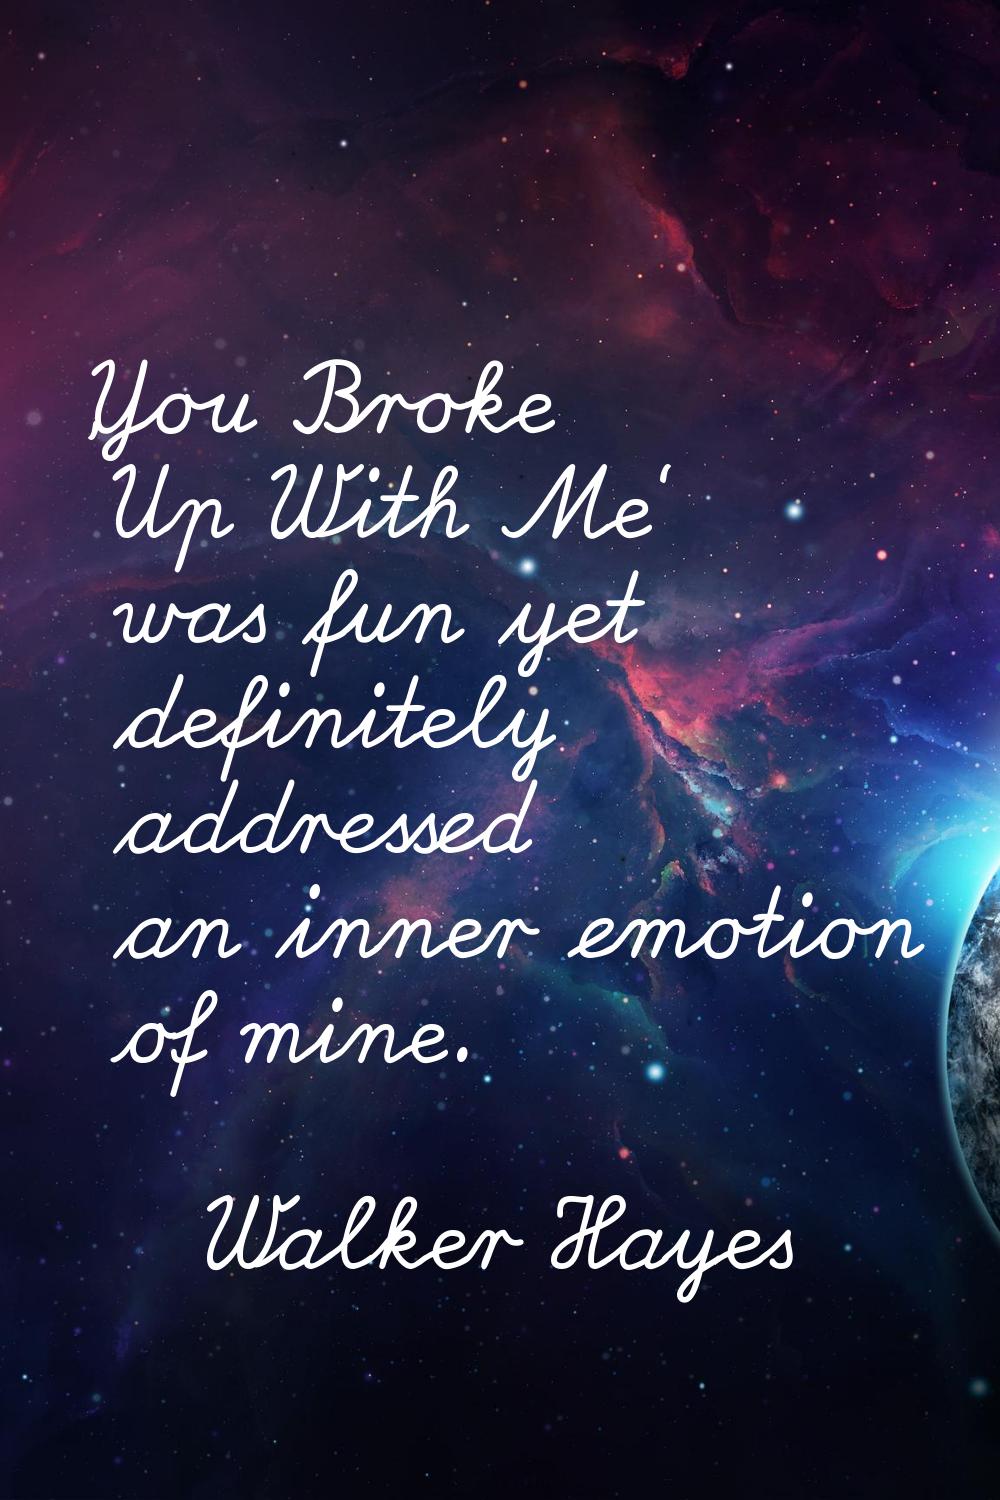 'You Broke Up With Me' was fun yet definitely addressed an inner emotion of mine.